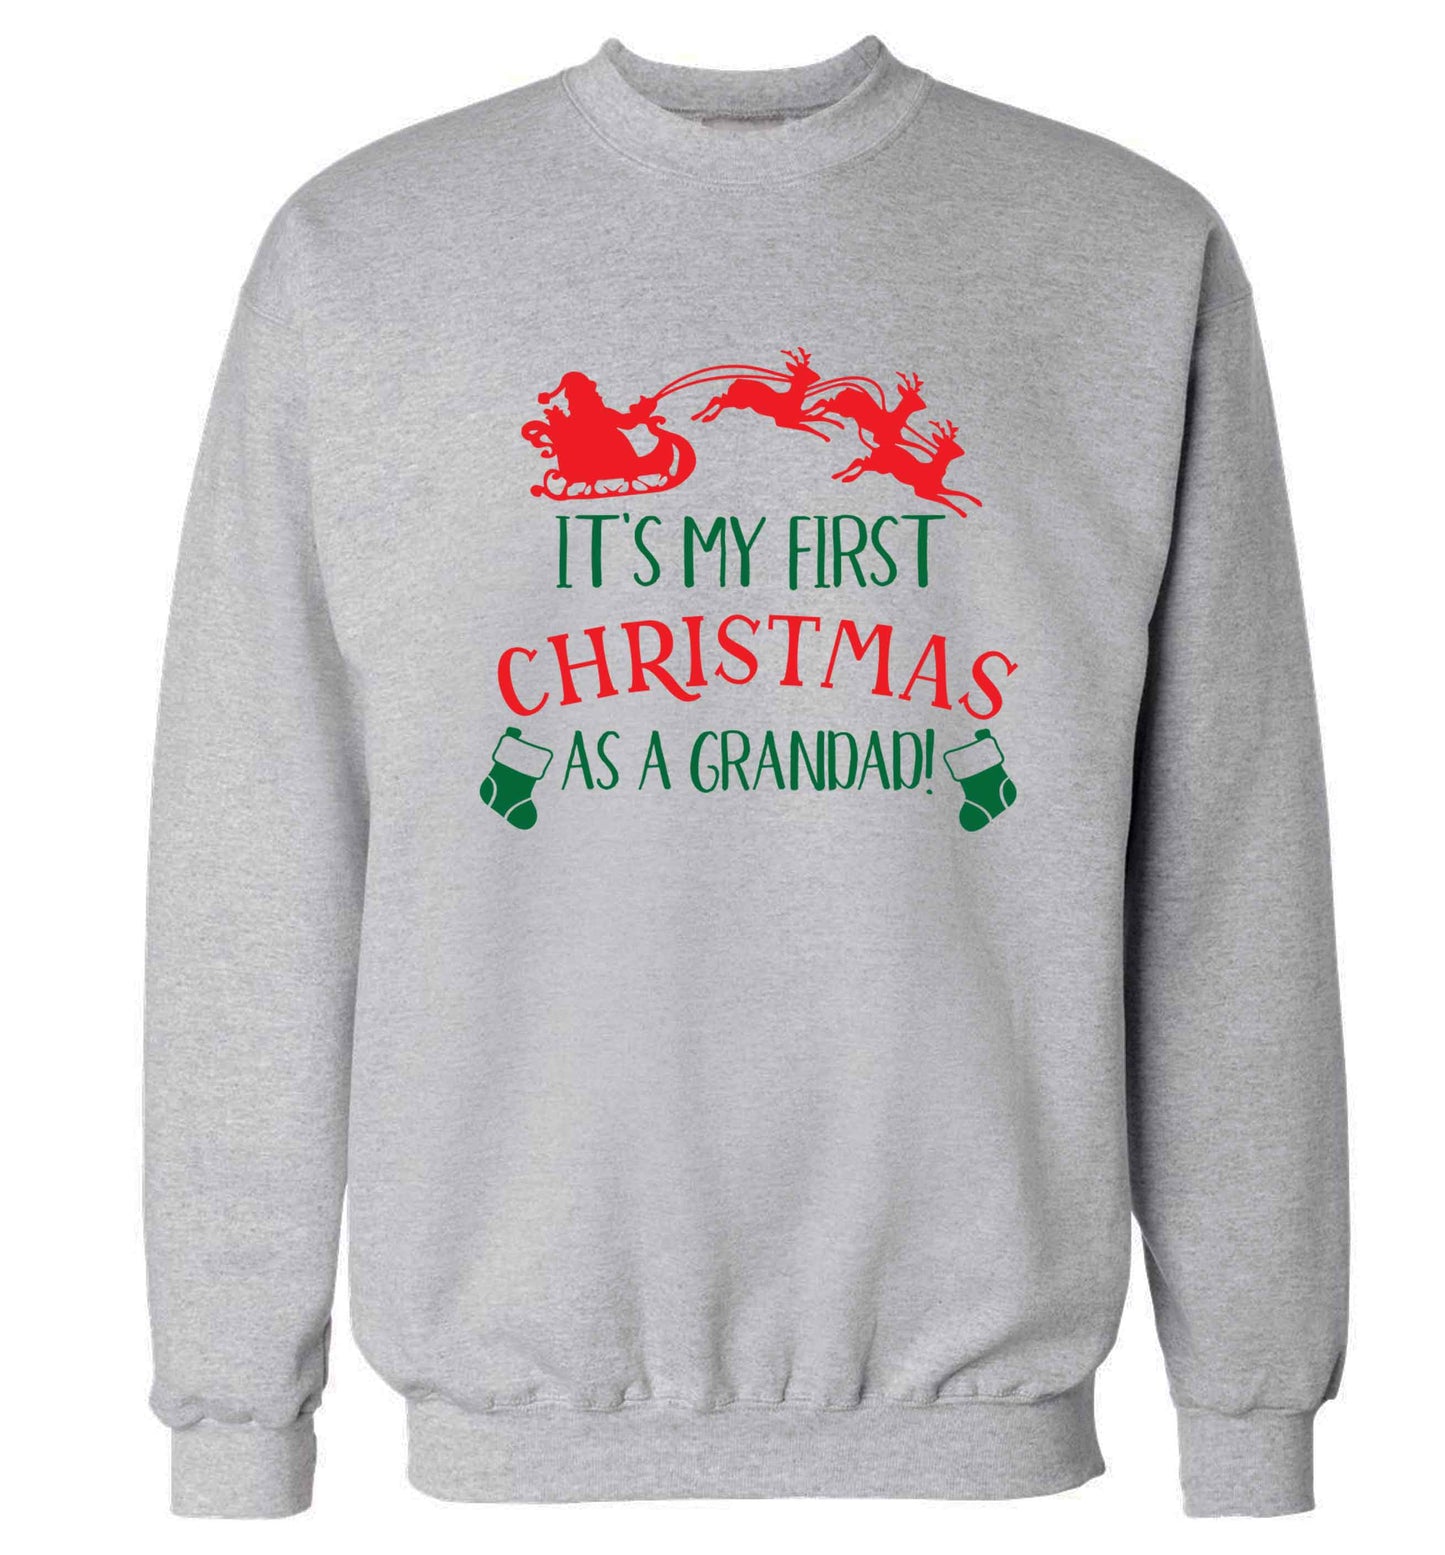 It's my first Christmas as a grandad! Adult's unisex grey Sweater 2XL